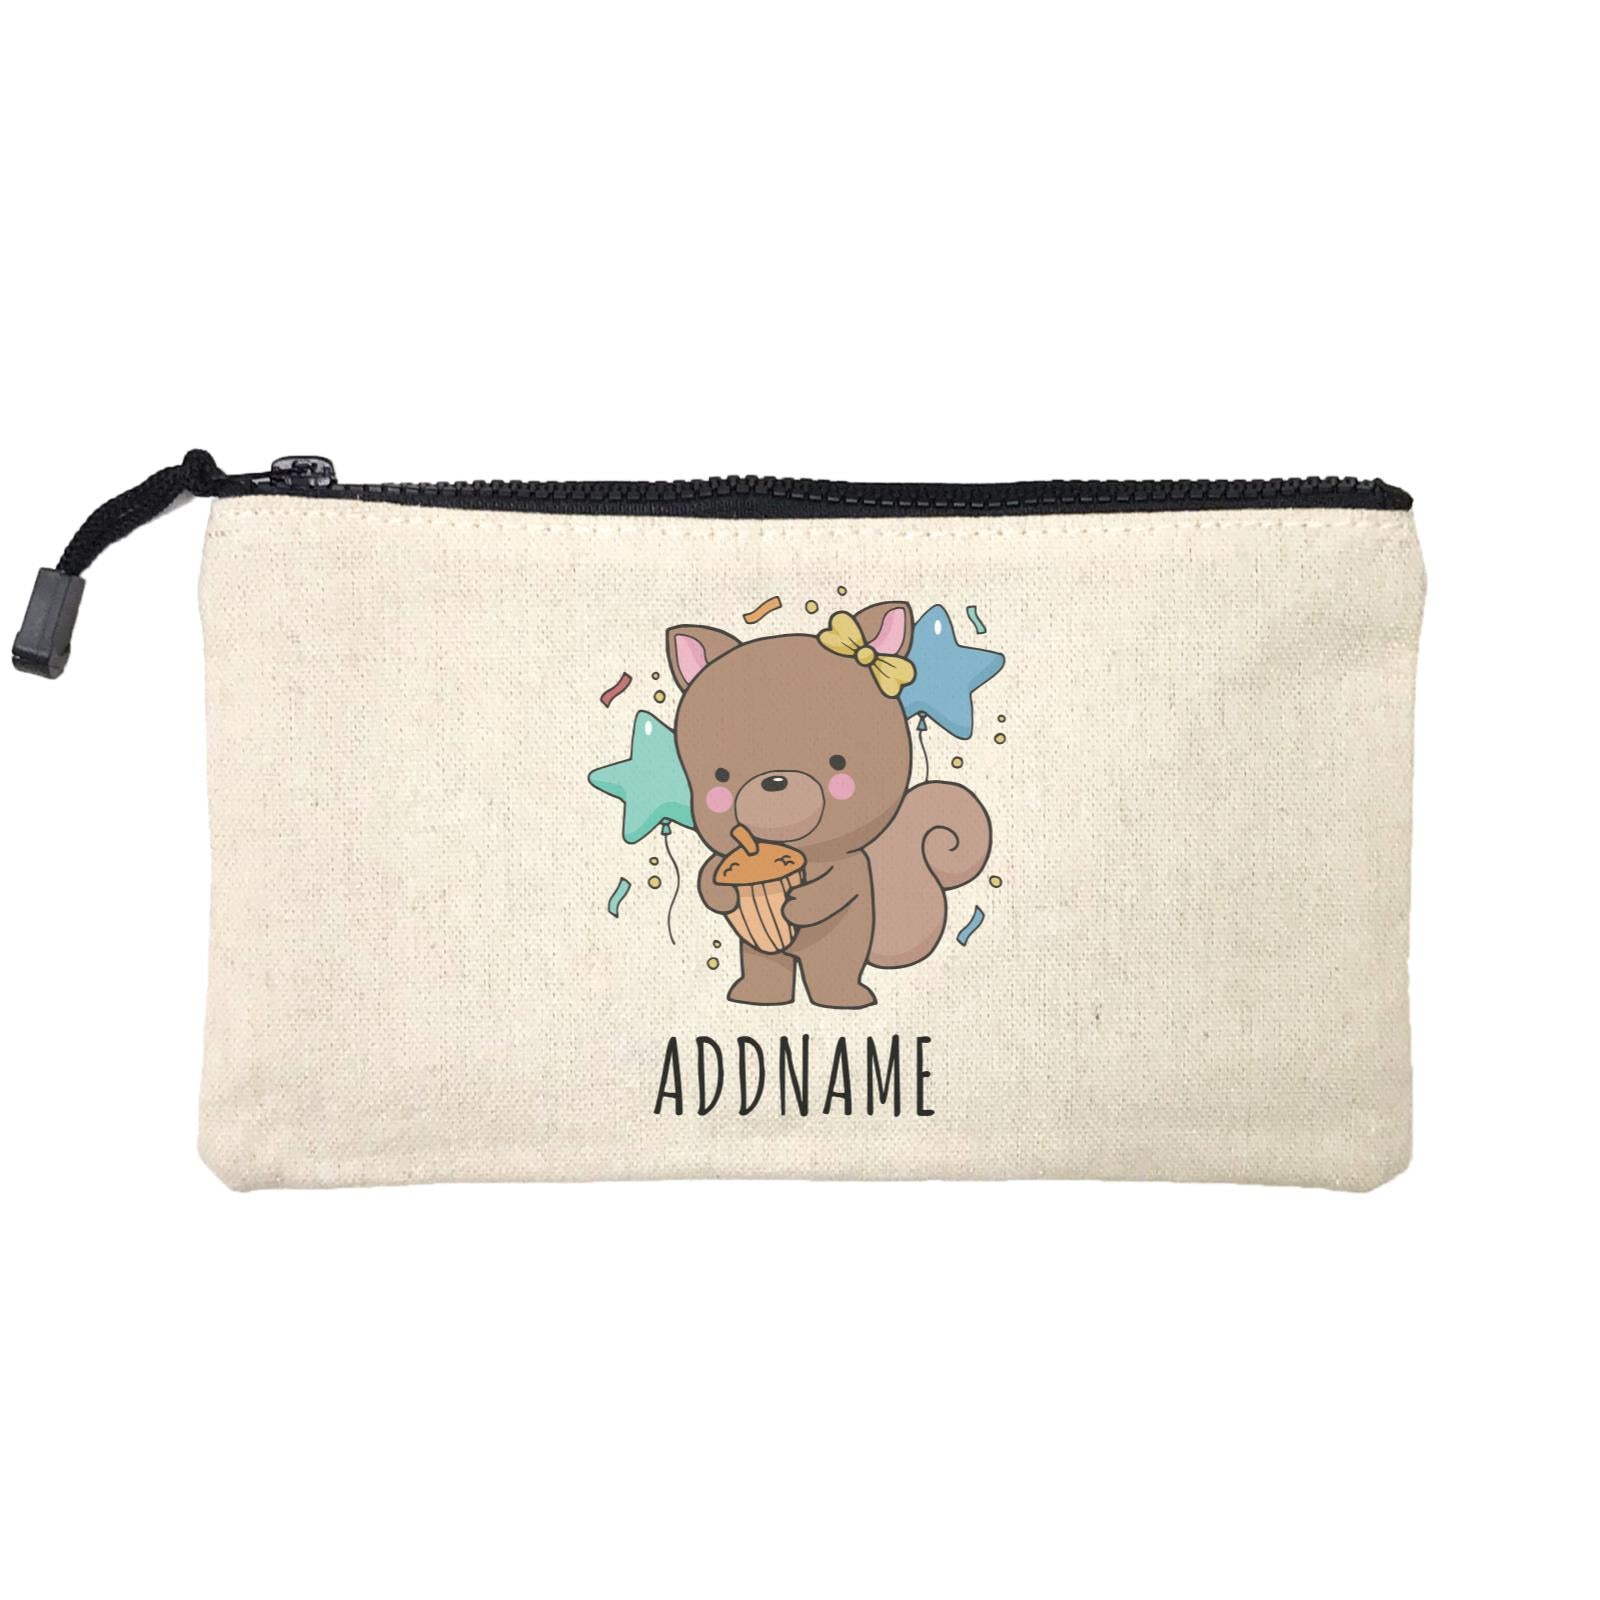 Birthday Sketch Animals Squirrel with Acorn Addname Turns 1 Mini Accessories Stationery Pouch